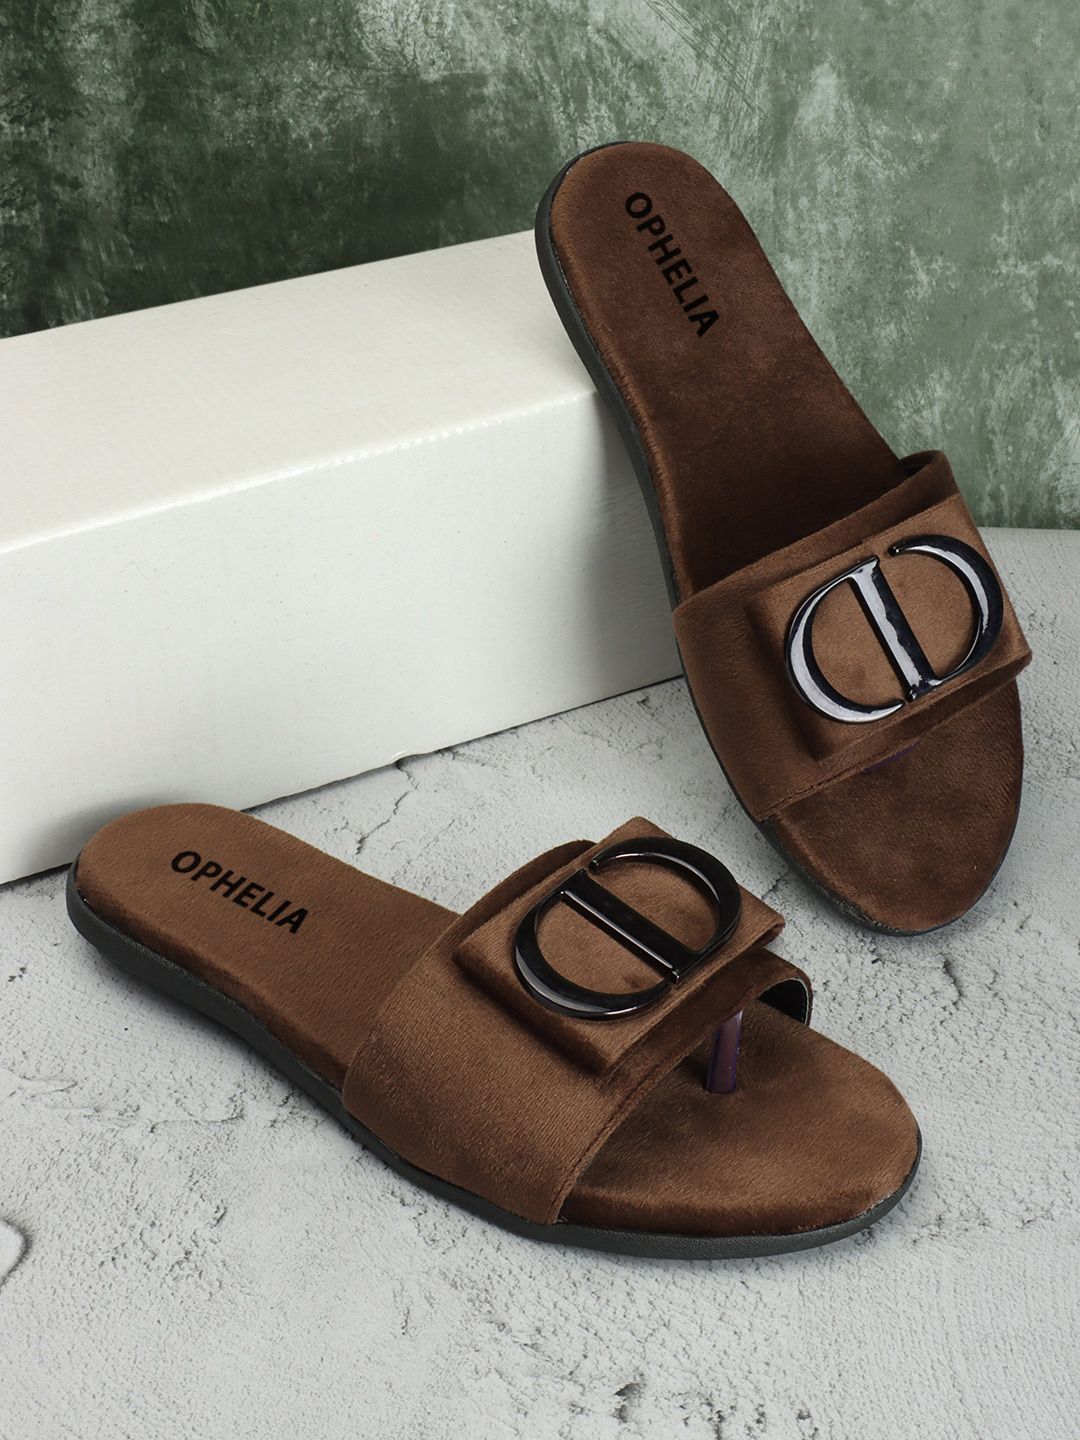 OPHELIA Women Open Toe Flats with Buckles Price in India